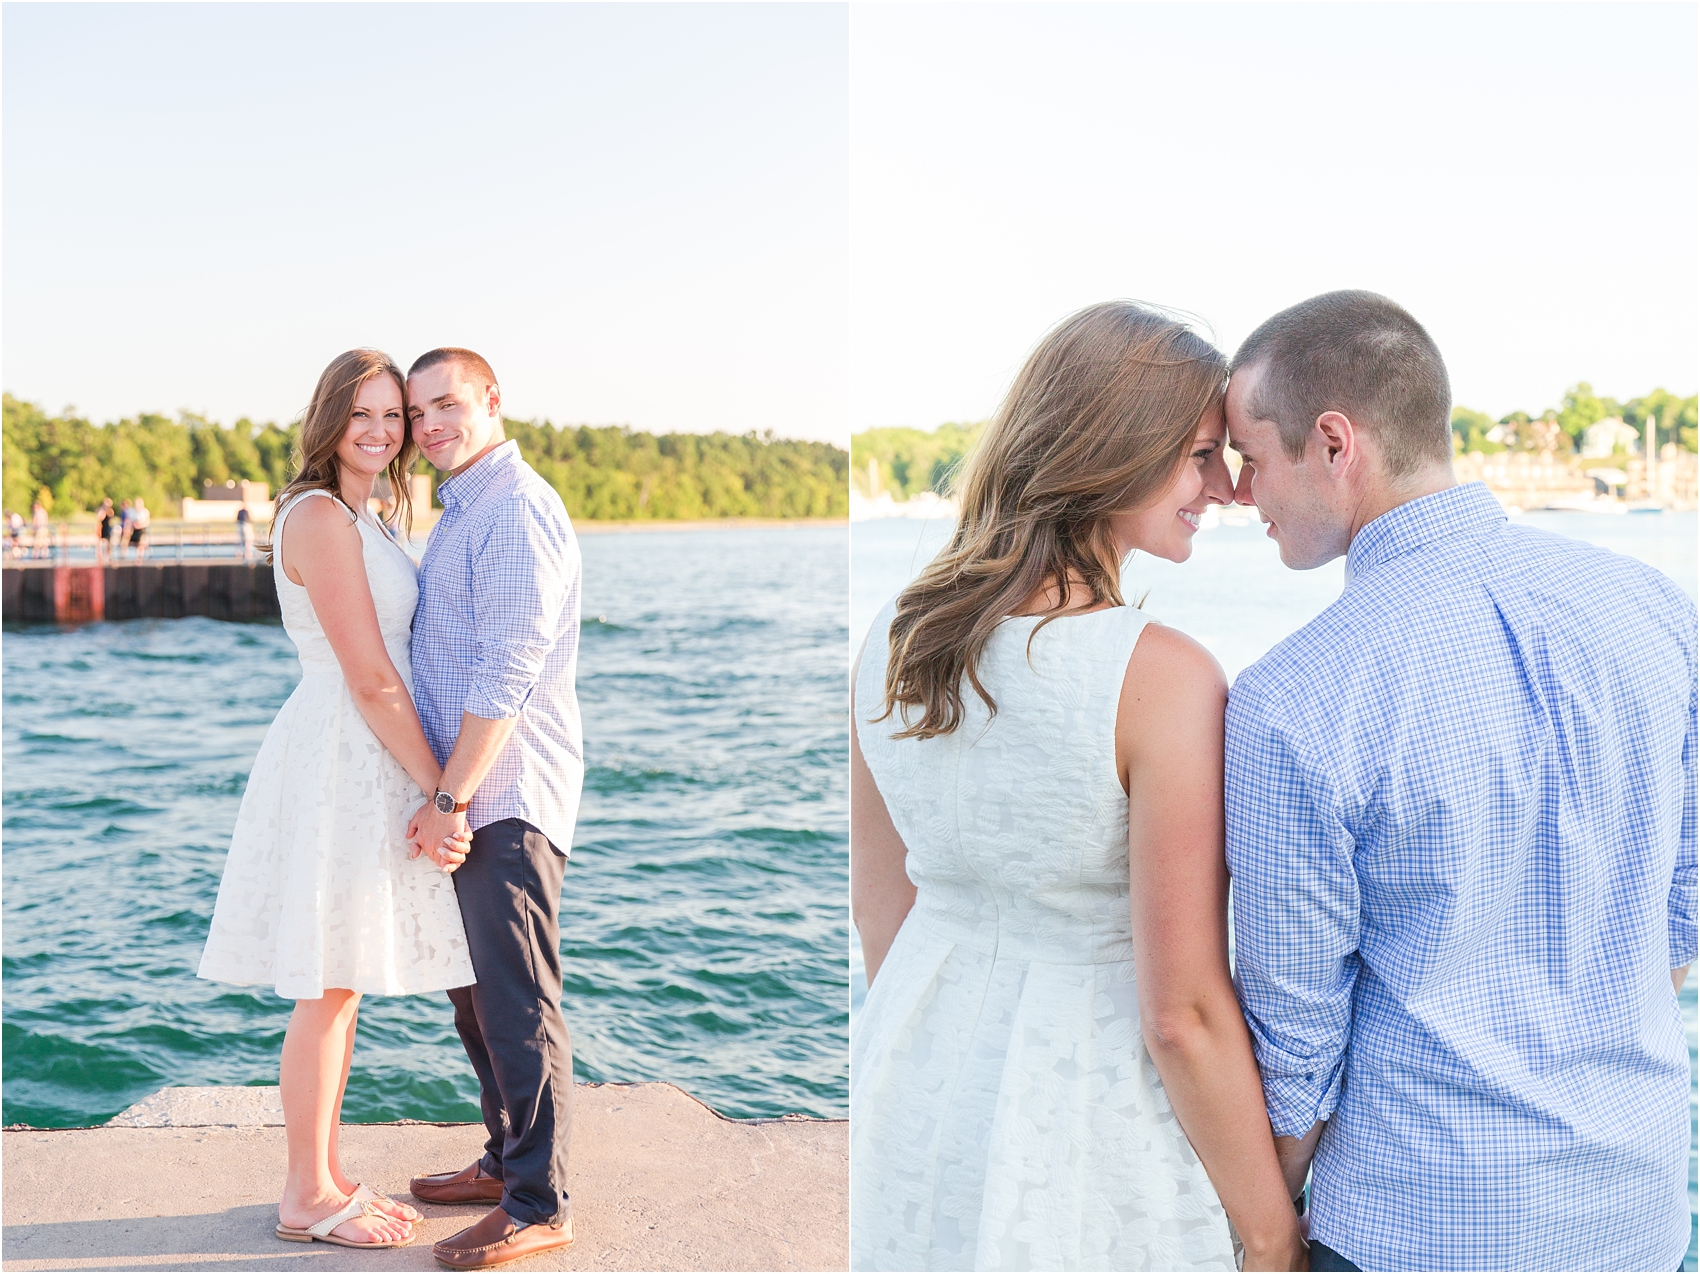 romantic-sunset-engagement-photos-at-the-lighthouse-in-charlevoix-mi-by-courtney-carolyn-photography_0002.jpg